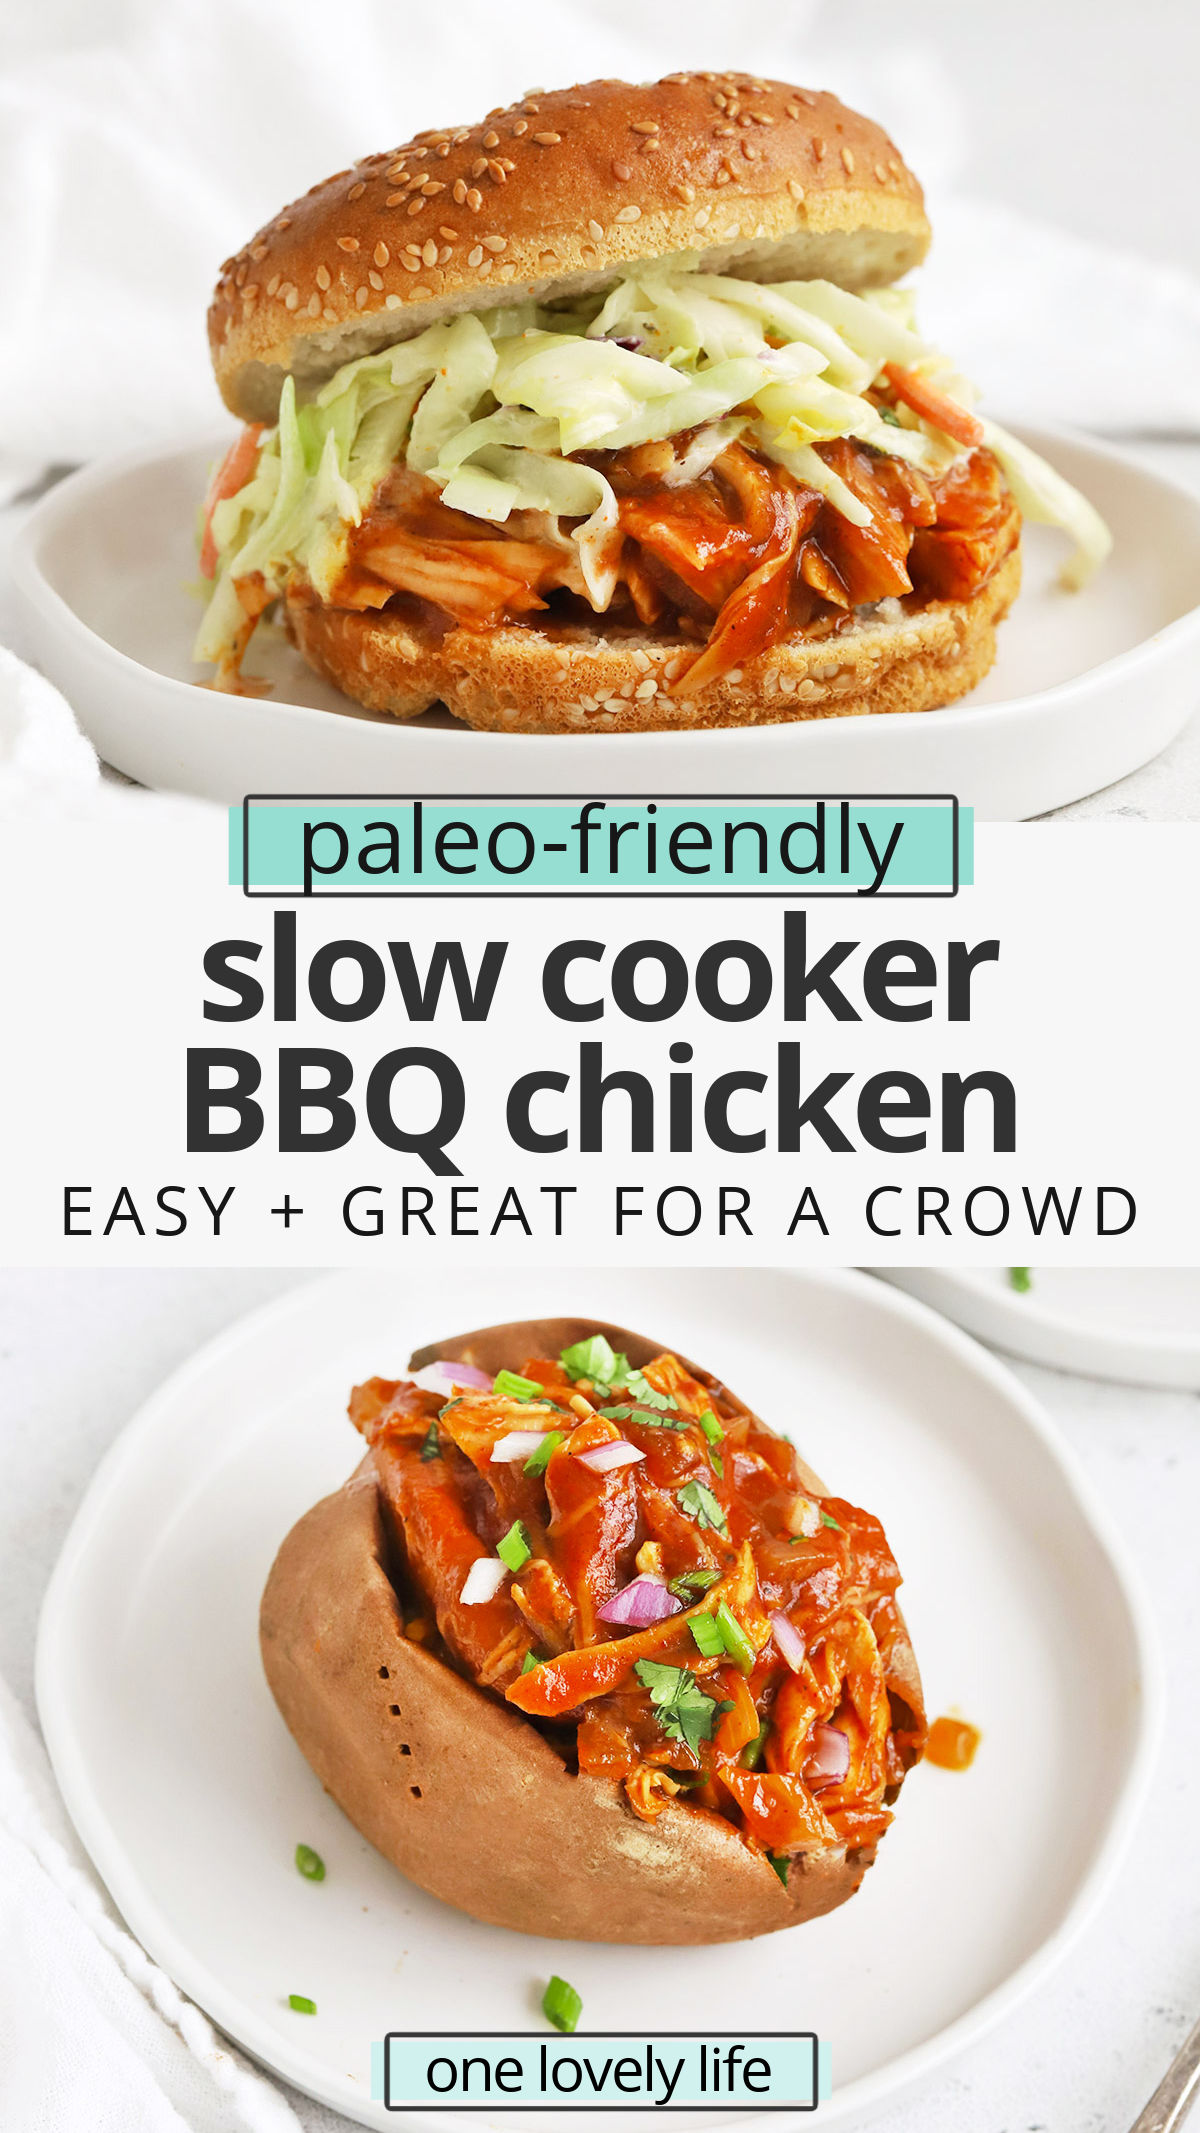 Slow Cooker BBQ Chicken - This tender crockpot barbecue chicken makes for delicious sandwiches, salads, pizzas & more! (Paleo-Friendly) // Crock Pot BBQ Chicken // Slow Cooker Barbecue Chicken Recipe // Slow Cooker Chicken // Summer recipe // Dinner for a crowd #bbq #chicken #slowcooker #easydinner